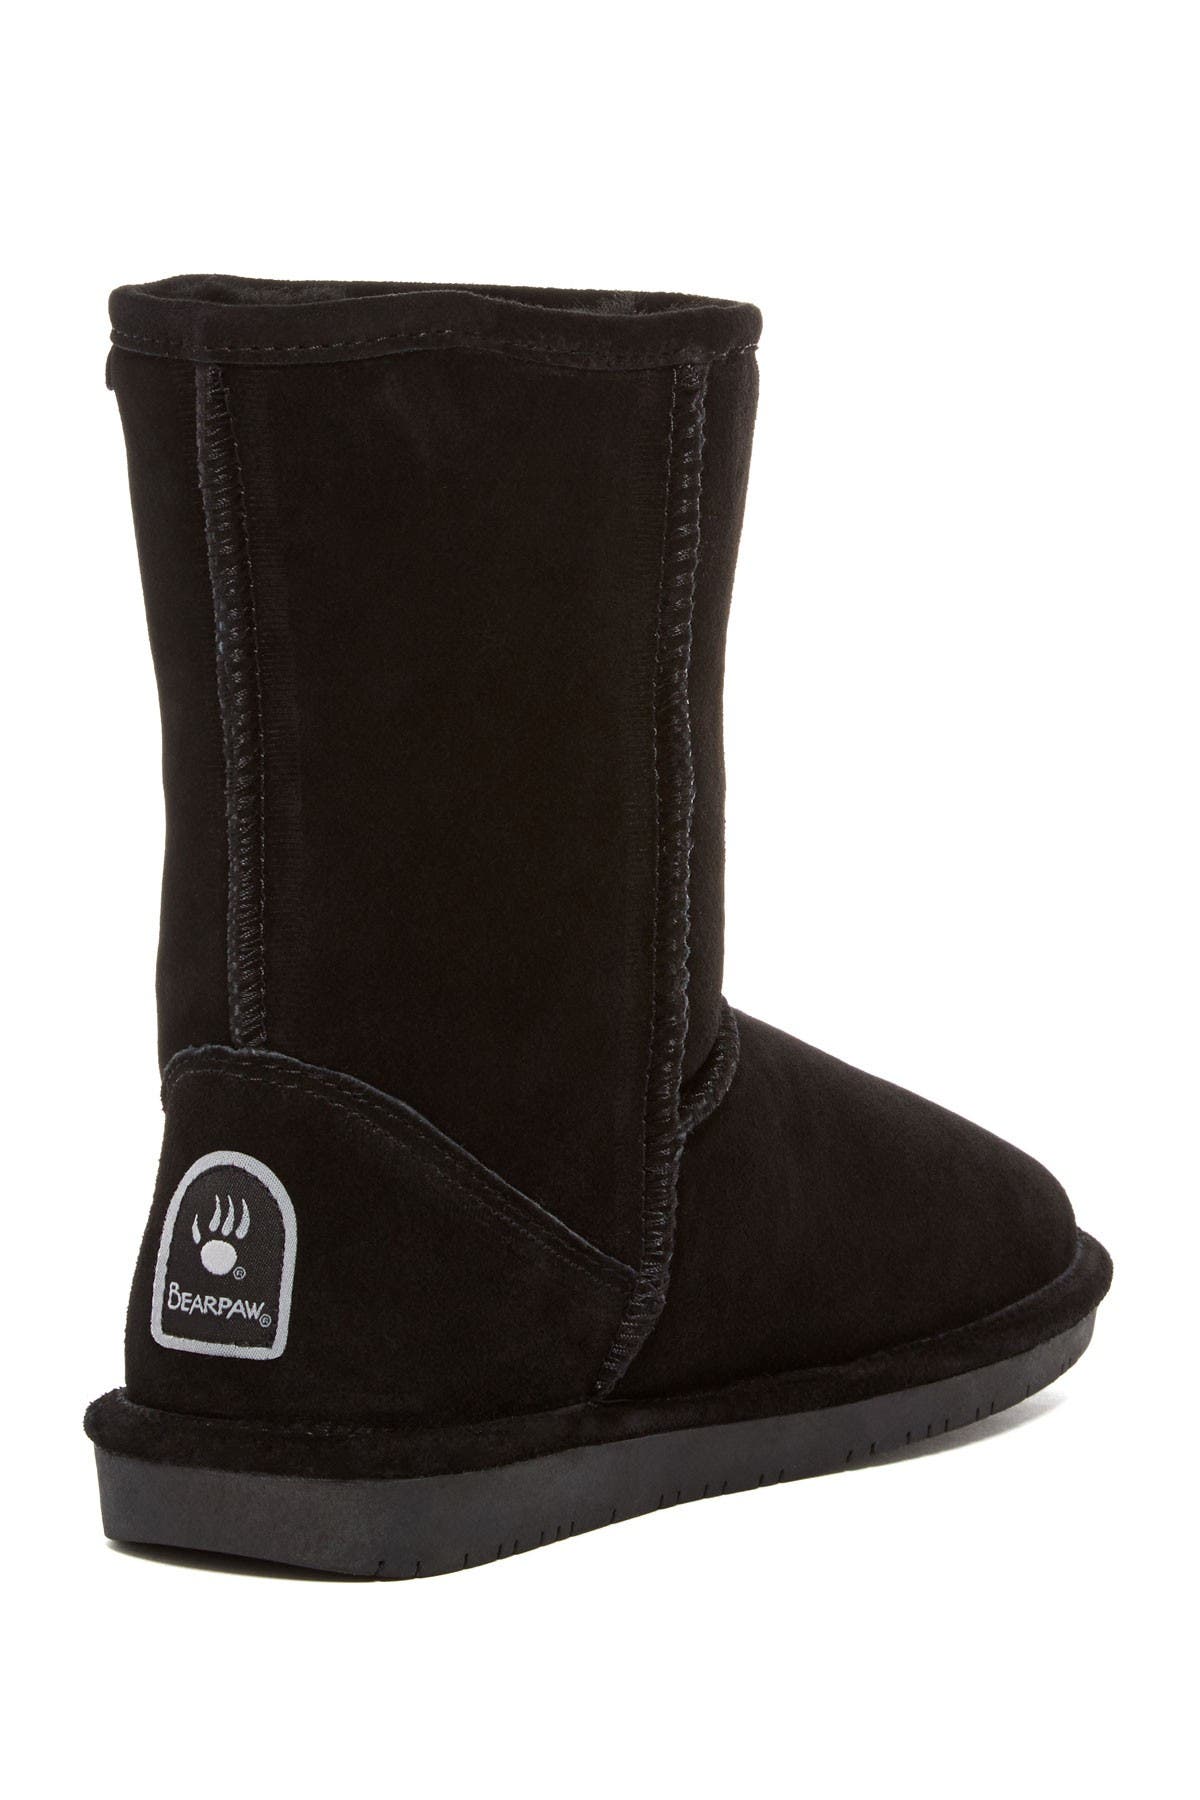 bearpaw boots size 2